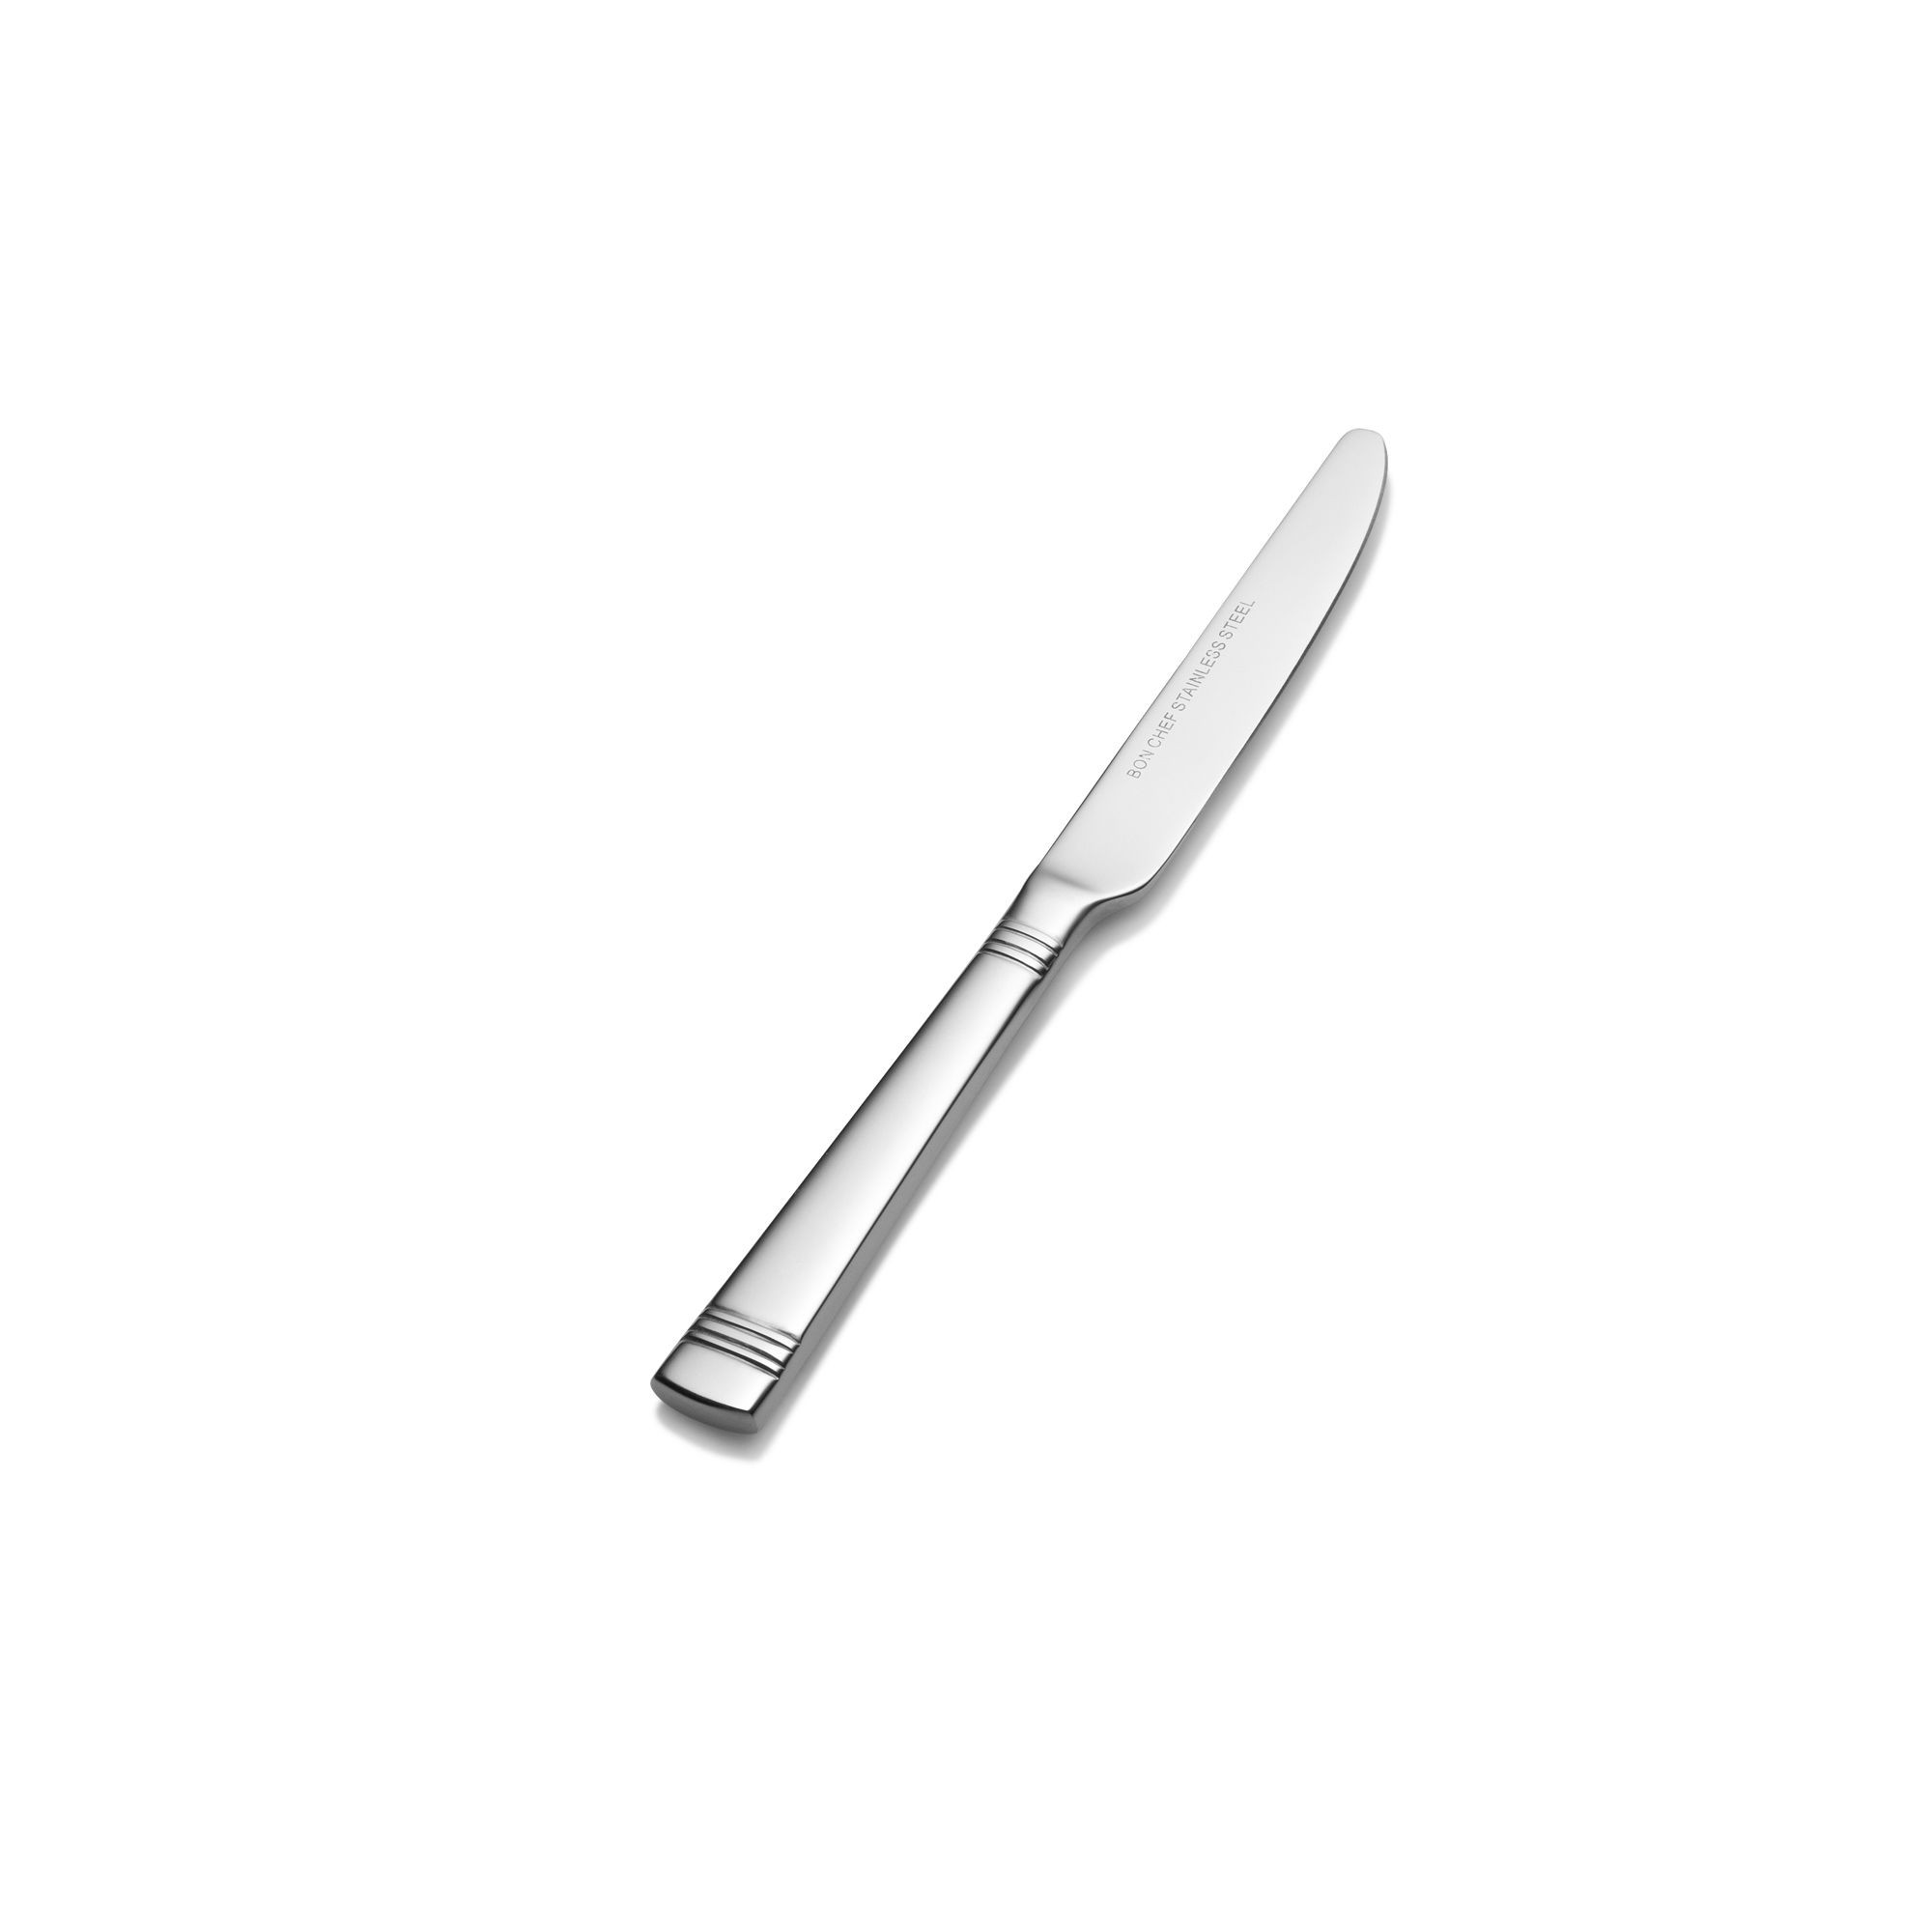 Bon Chef S2617 Julia 18/8 Stainless Steel European Solid Handle Butter Knife